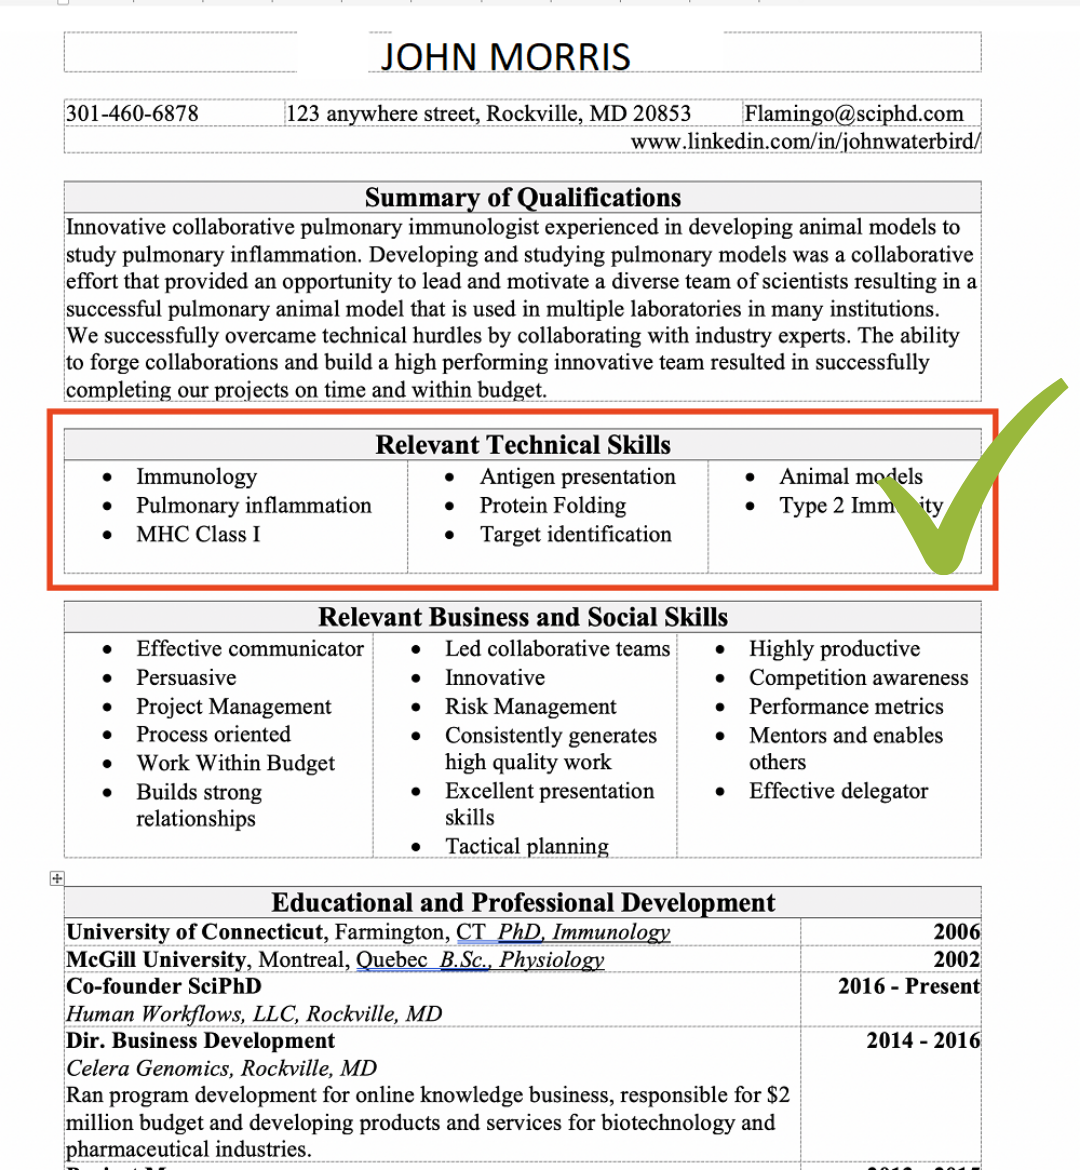 Resume Skills List of (400+) Making Stand out resume